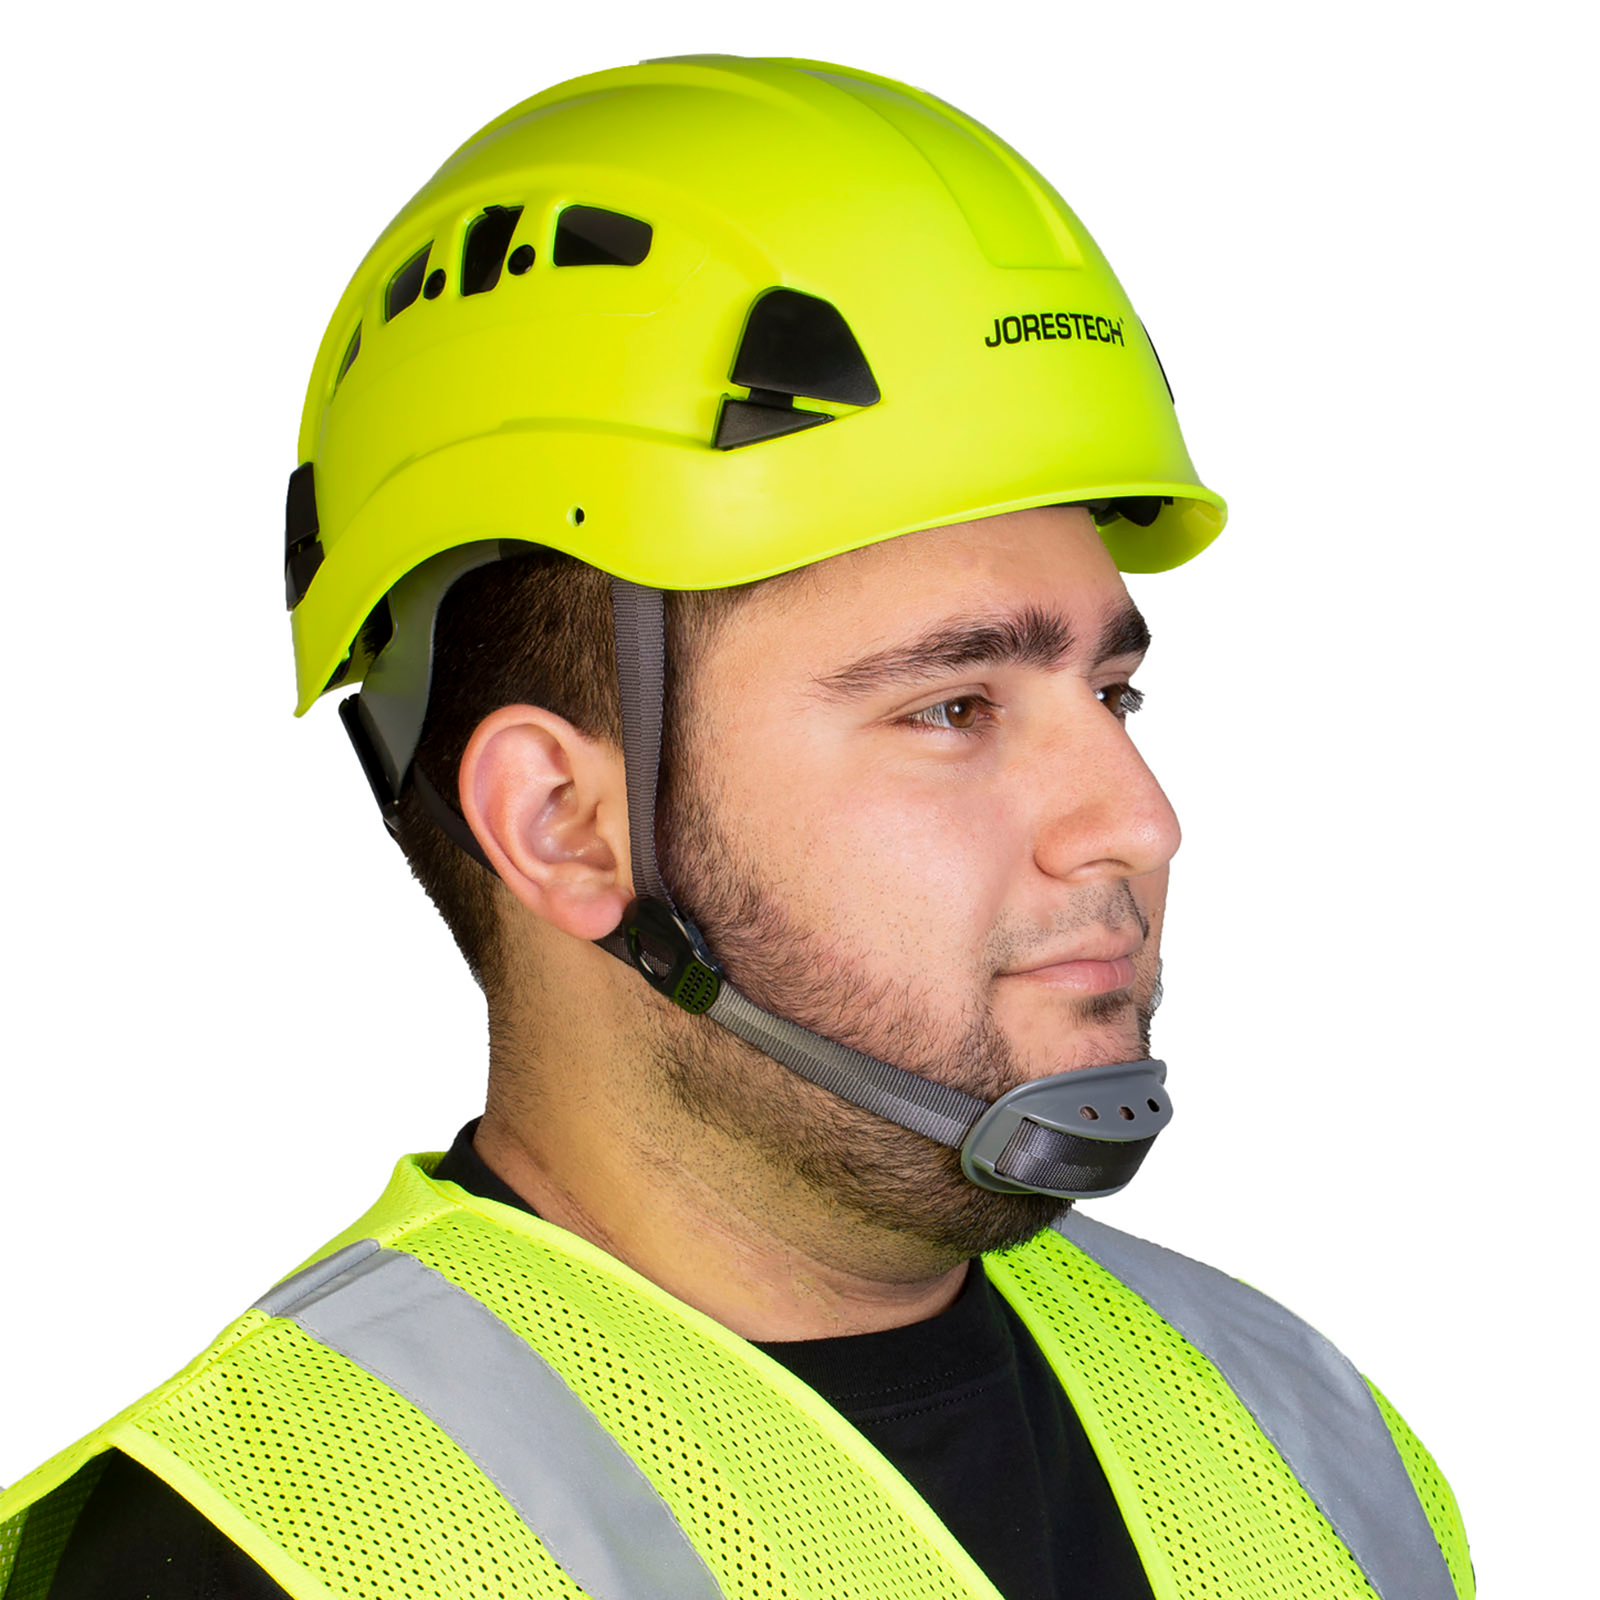 A person wearing the Jorestech lime ventilated rescue hard hat with adjustable 6 point suspension and chin strap